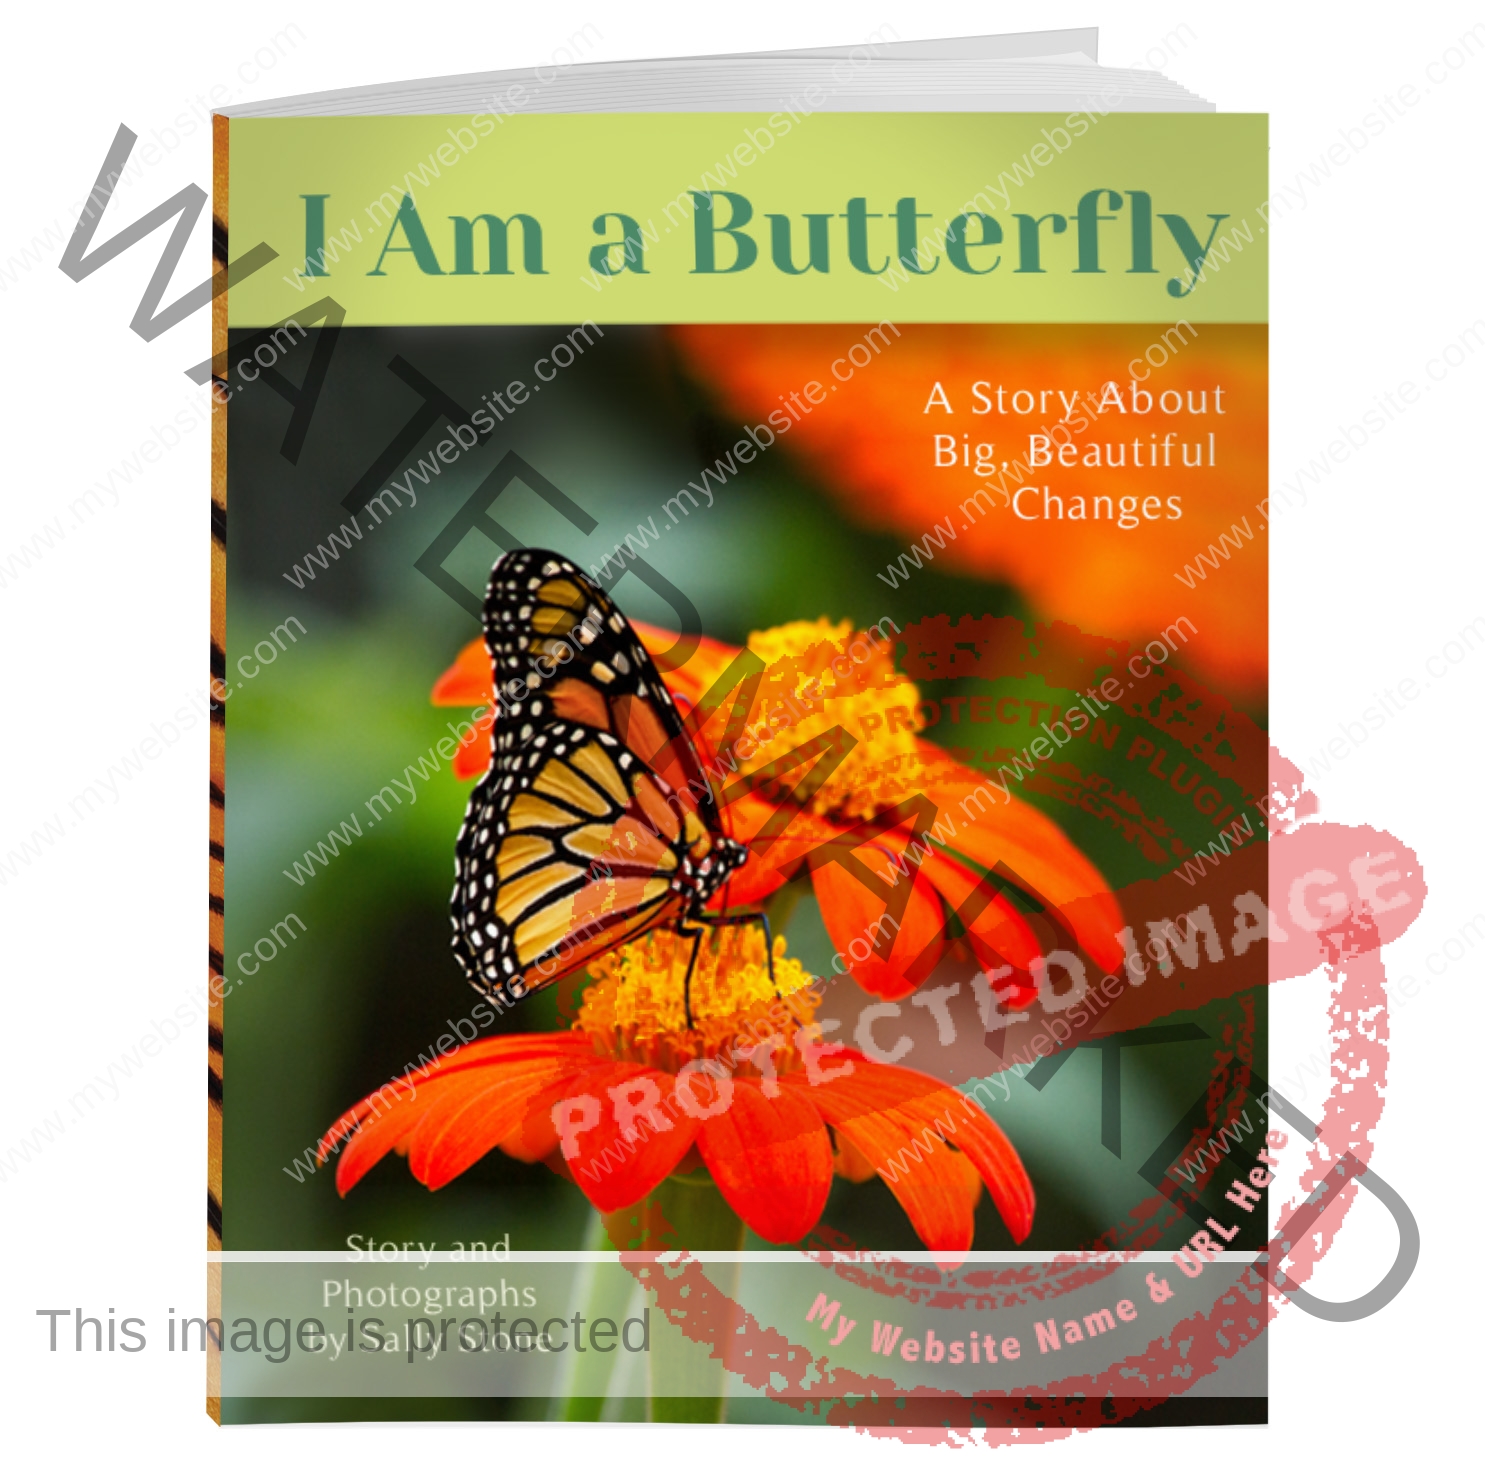 I Am a Butterfly Book Paperback